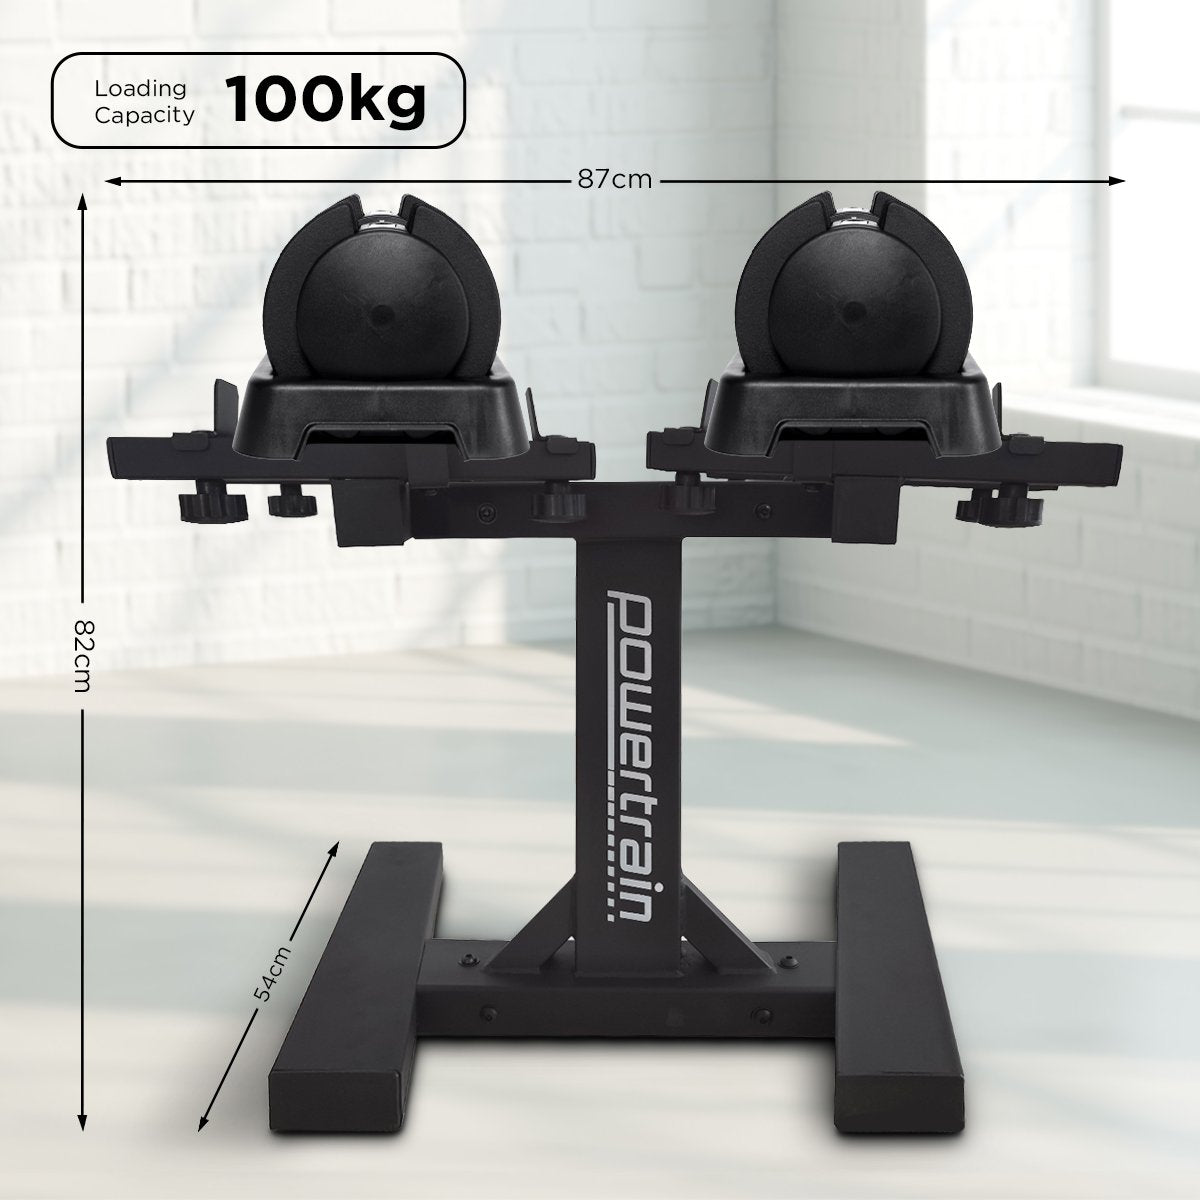 Powertrain GEN2 Pro Adjustable Dumbbell Set - 2 x 25kg (50kg) Home Gym Weights with Stand